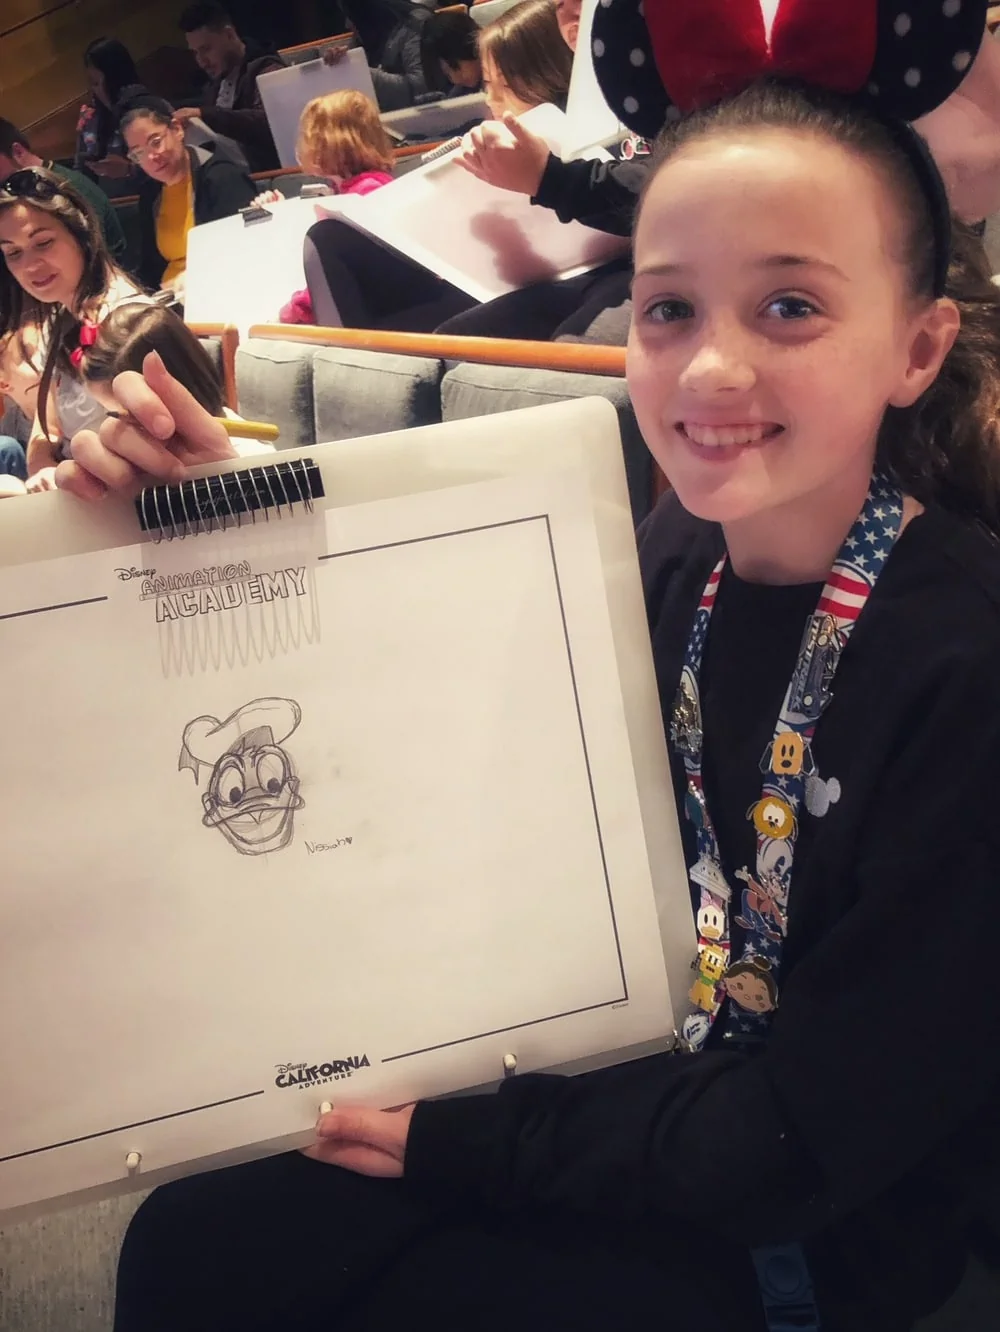 free drawings at Animation Academy in Disneyland